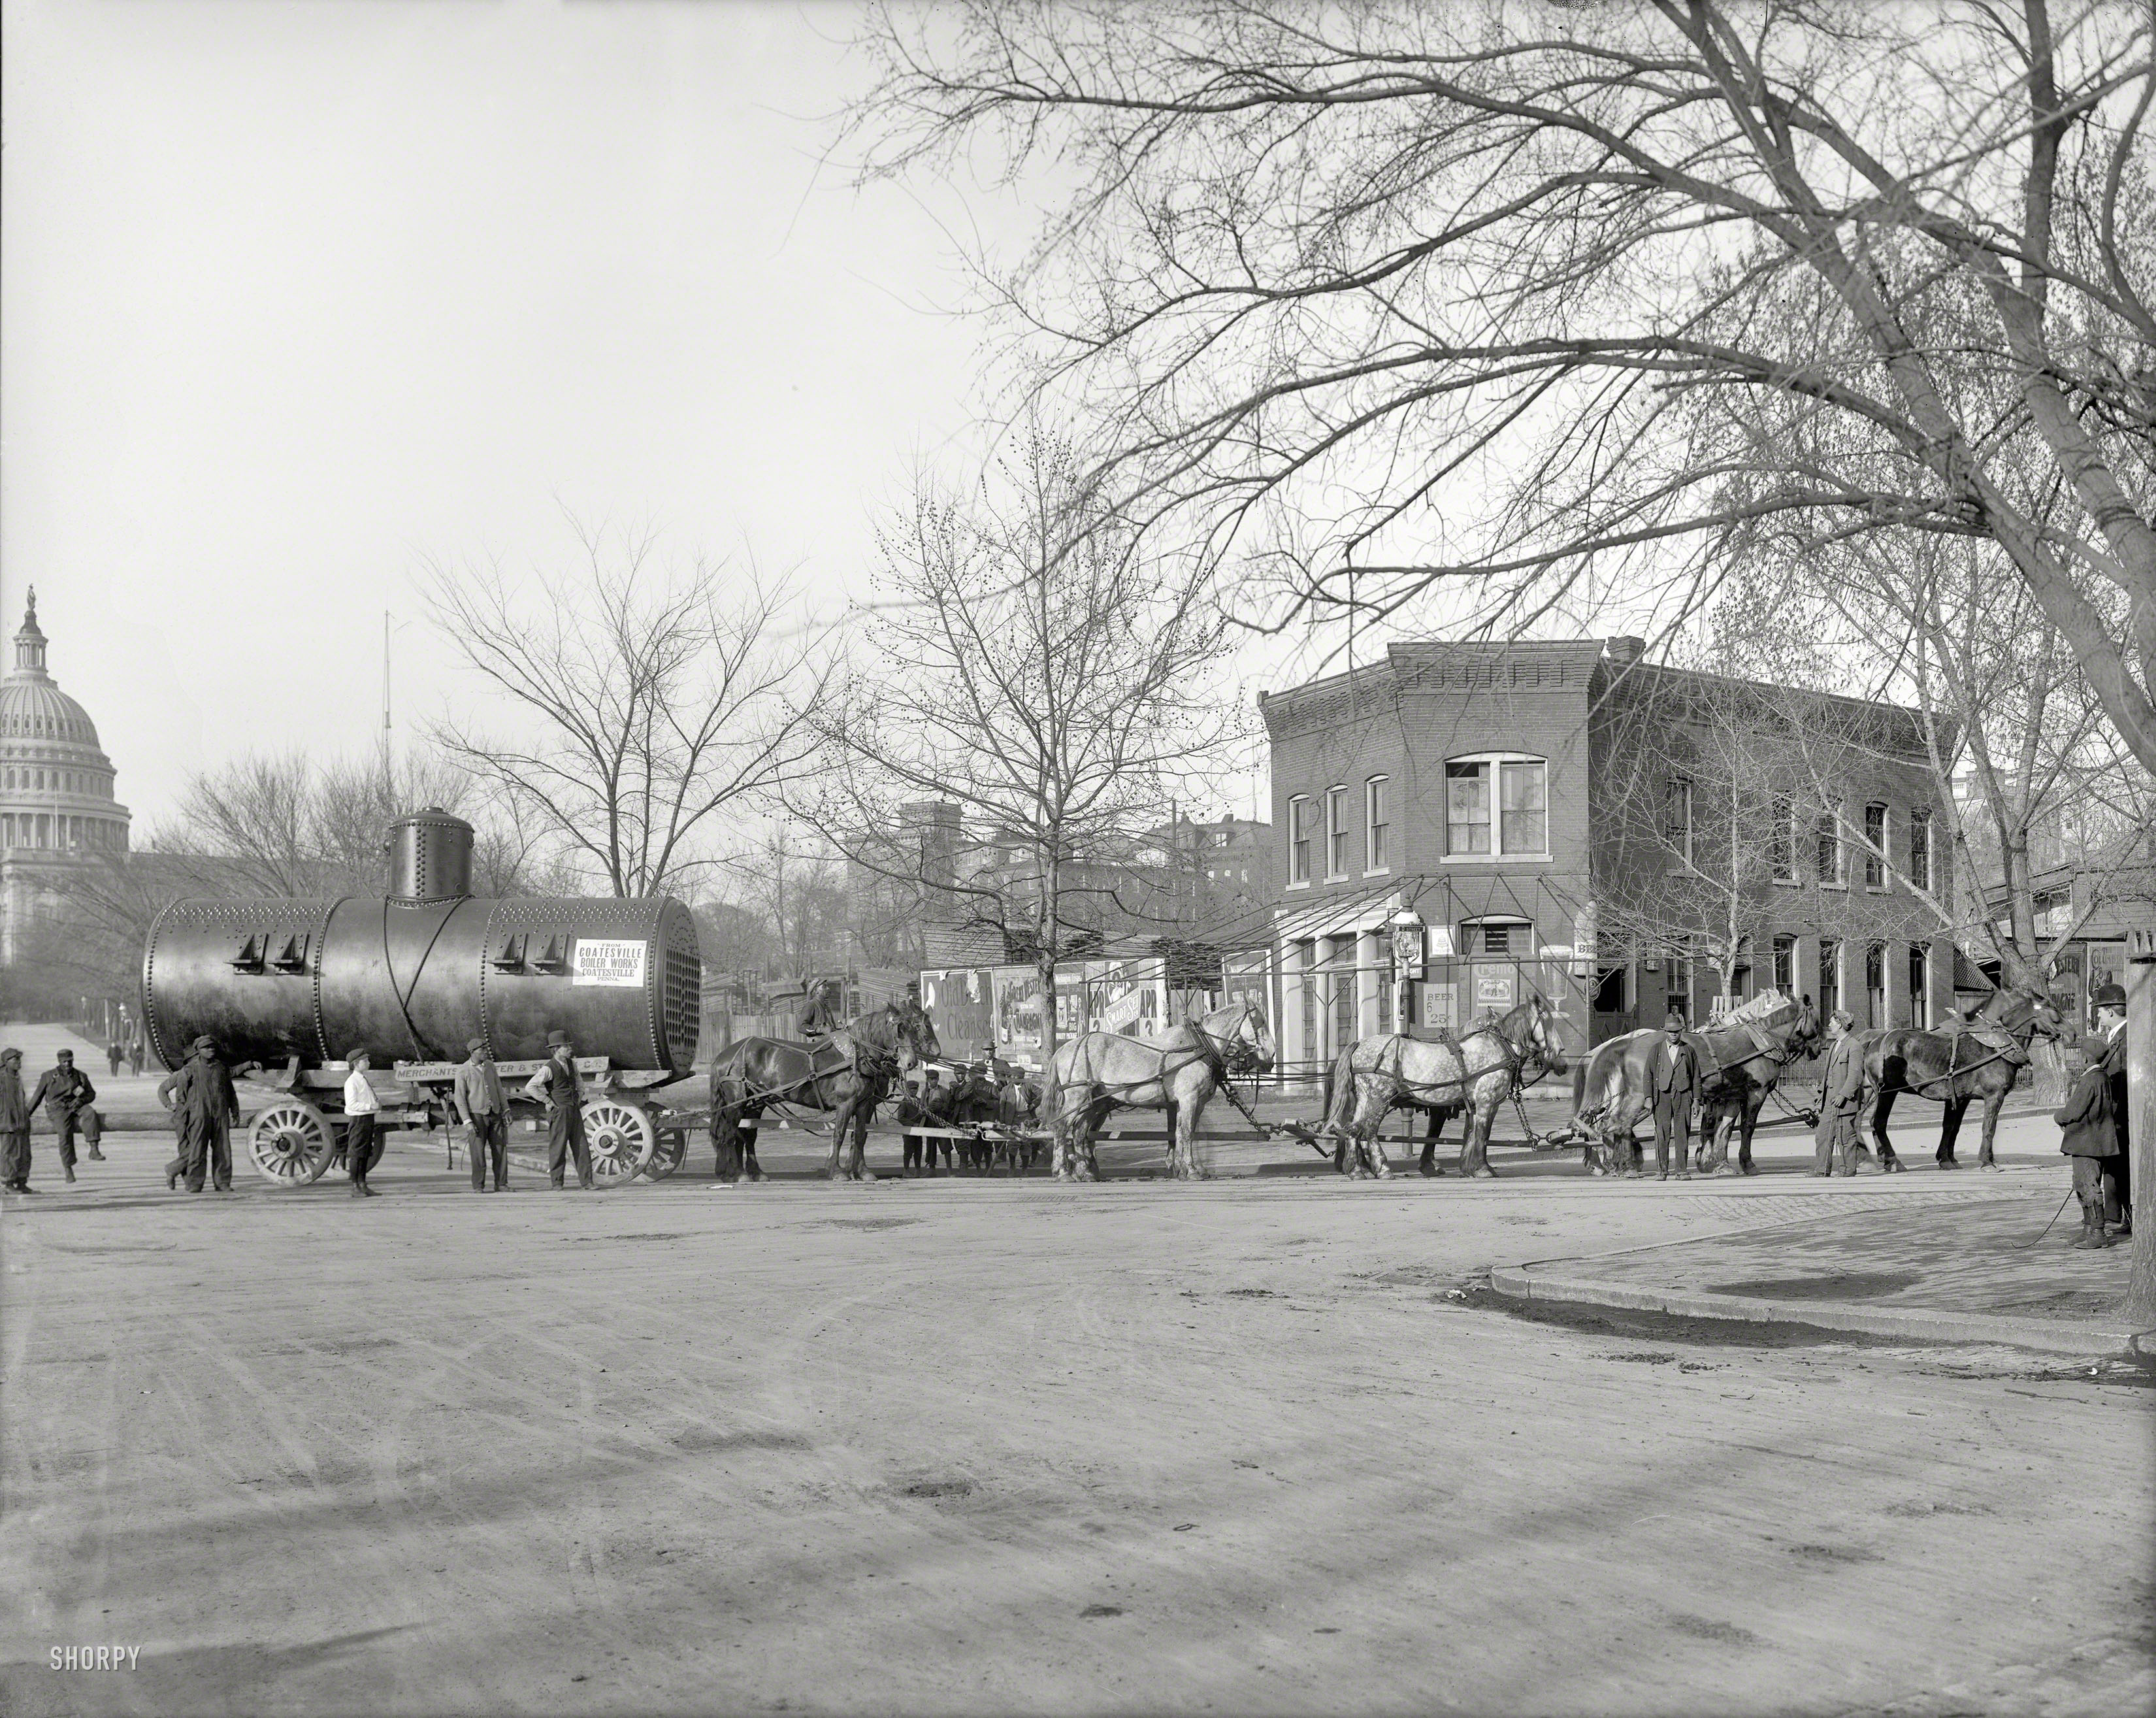 "Merchants Transfer & Storage Co., Washington, D.C." In 1911, moving a boiler on D Street within sight of the Capitol with a 12-horse team. Bonus: Many old billboards. Harris & Ewing Collection glass negative. View full size.